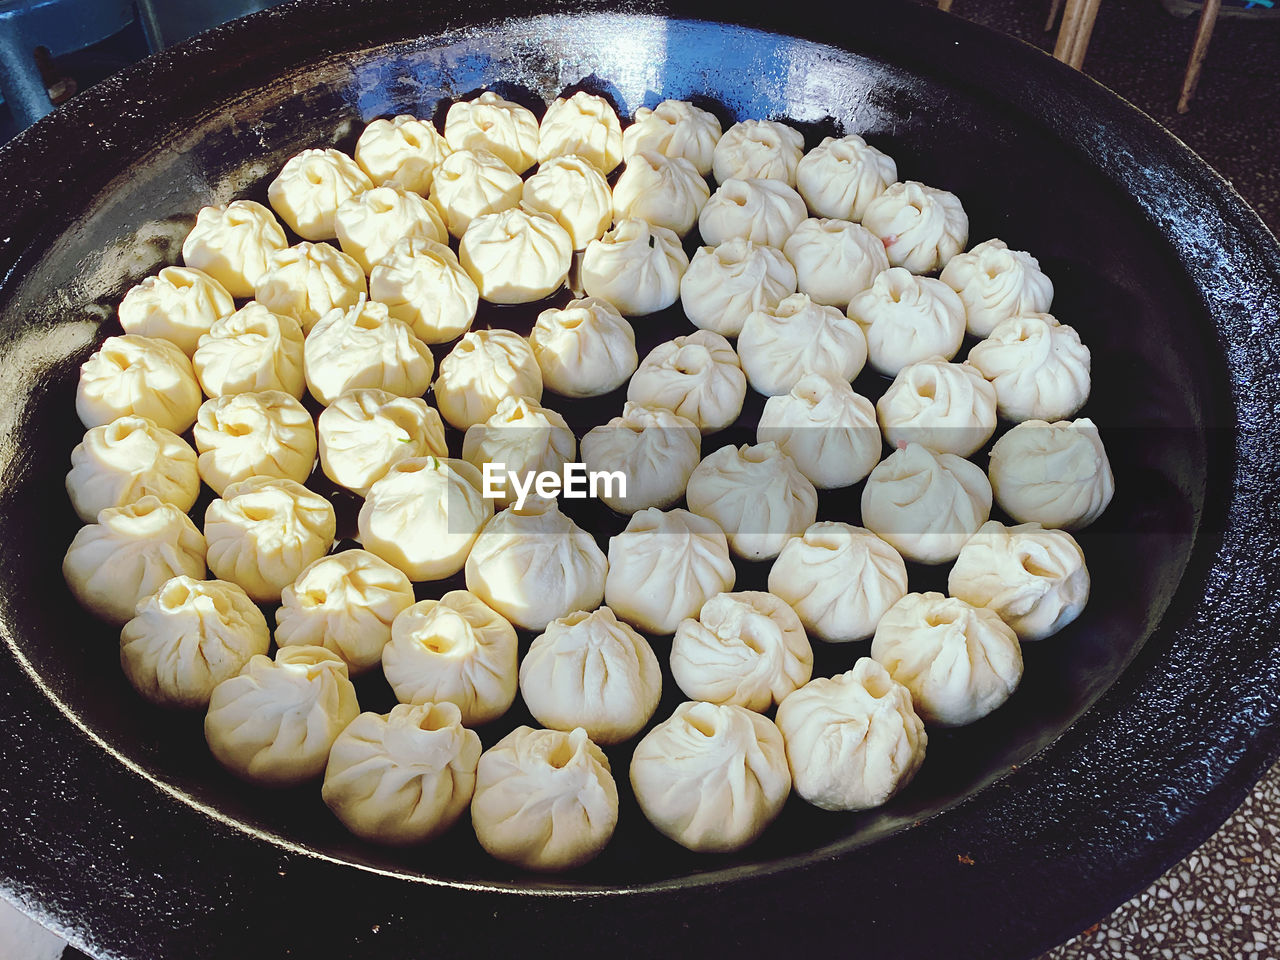 food, food and drink, freshness, dish, cuisine, no people, dumpling, chinese food, indoors, chinese dumpling, healthy eating, still life, produce, high angle view, dessert, wellbeing, large group of objects, snack, close-up, household equipment, street food, asian food, preparing food, fried